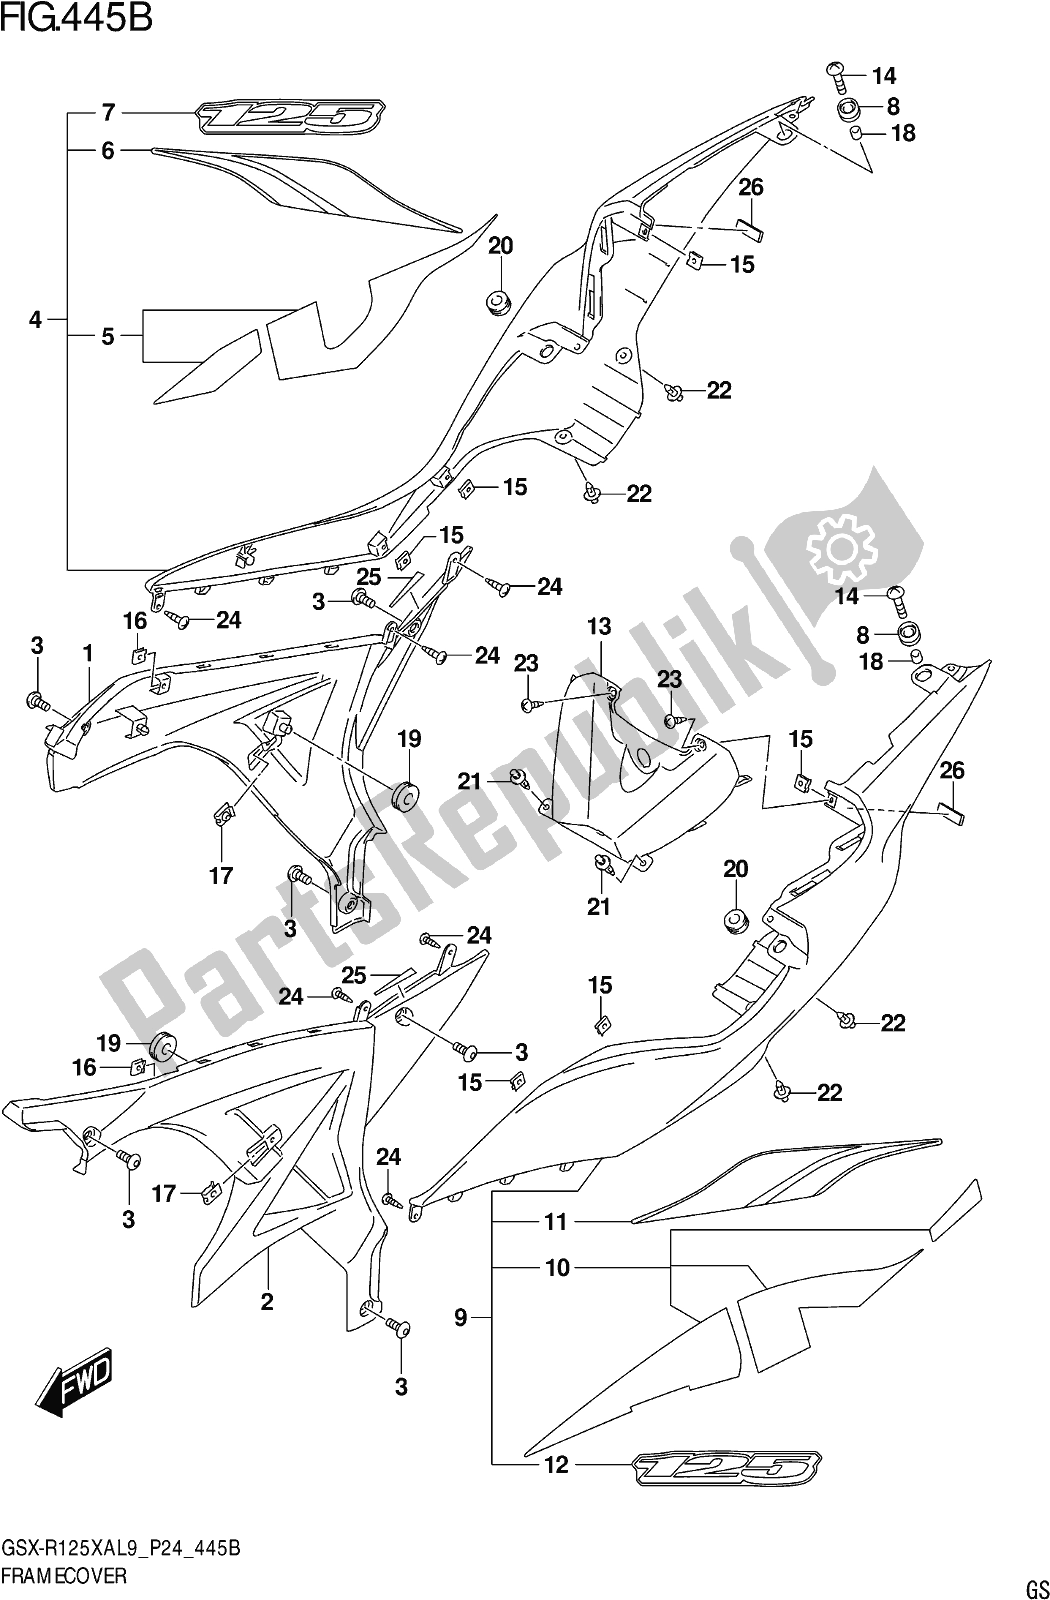 All parts for the Fig. 445b Frame Cover of the Suzuki Gsx-r 125 XA 2019